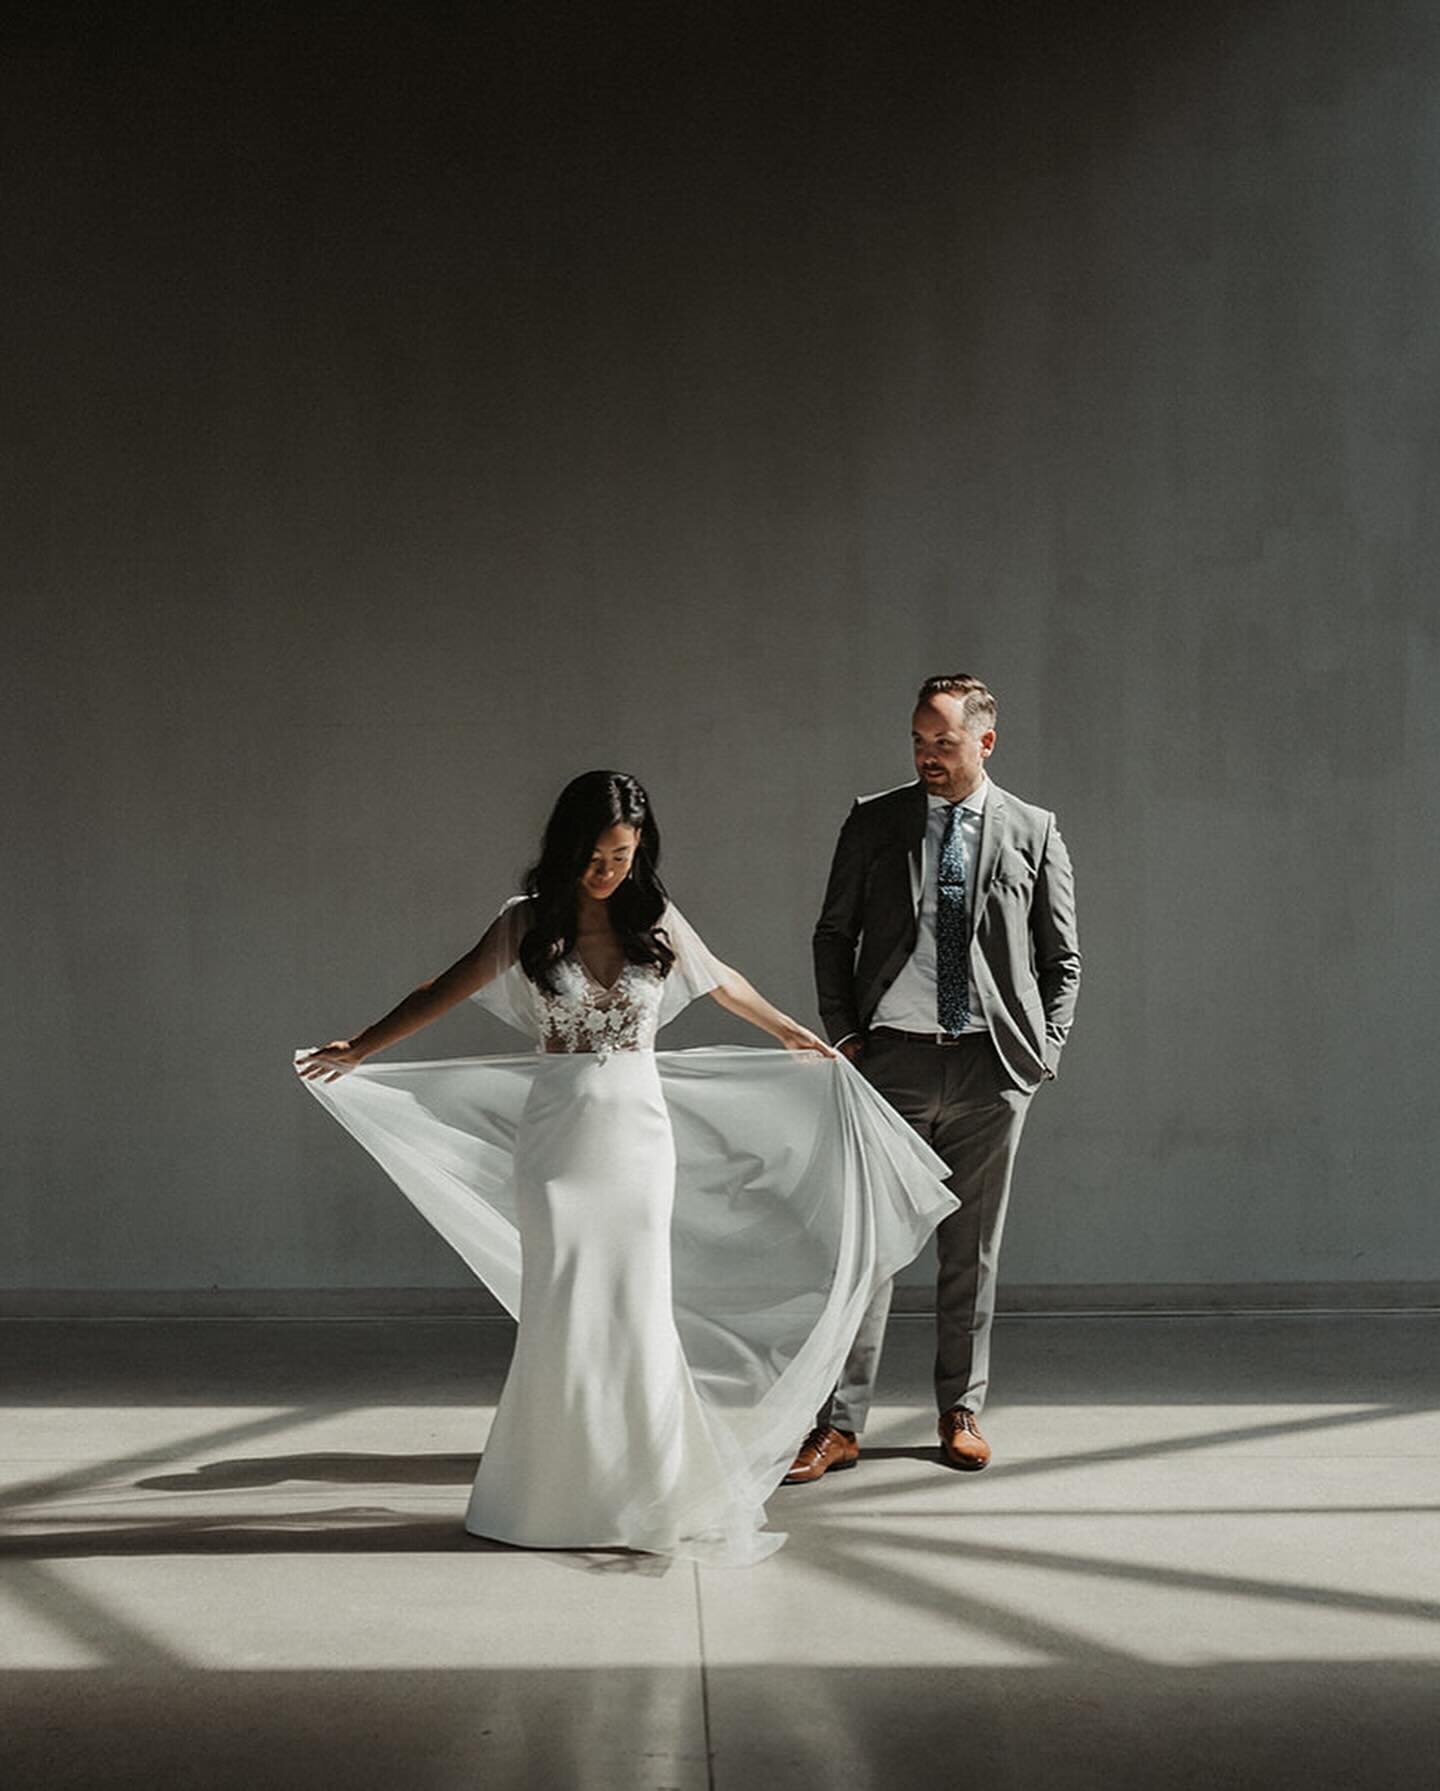 // the lighting + dress combination was undeniably magical, making it impossible not to play around with Amandas dress ✨🤍

Amazing Vendors
Photographer @jessicasilveiraphoto
Wedding Gown @langloisbrides
Grooms Suit @indochino
Venue @thesymesca
Plann